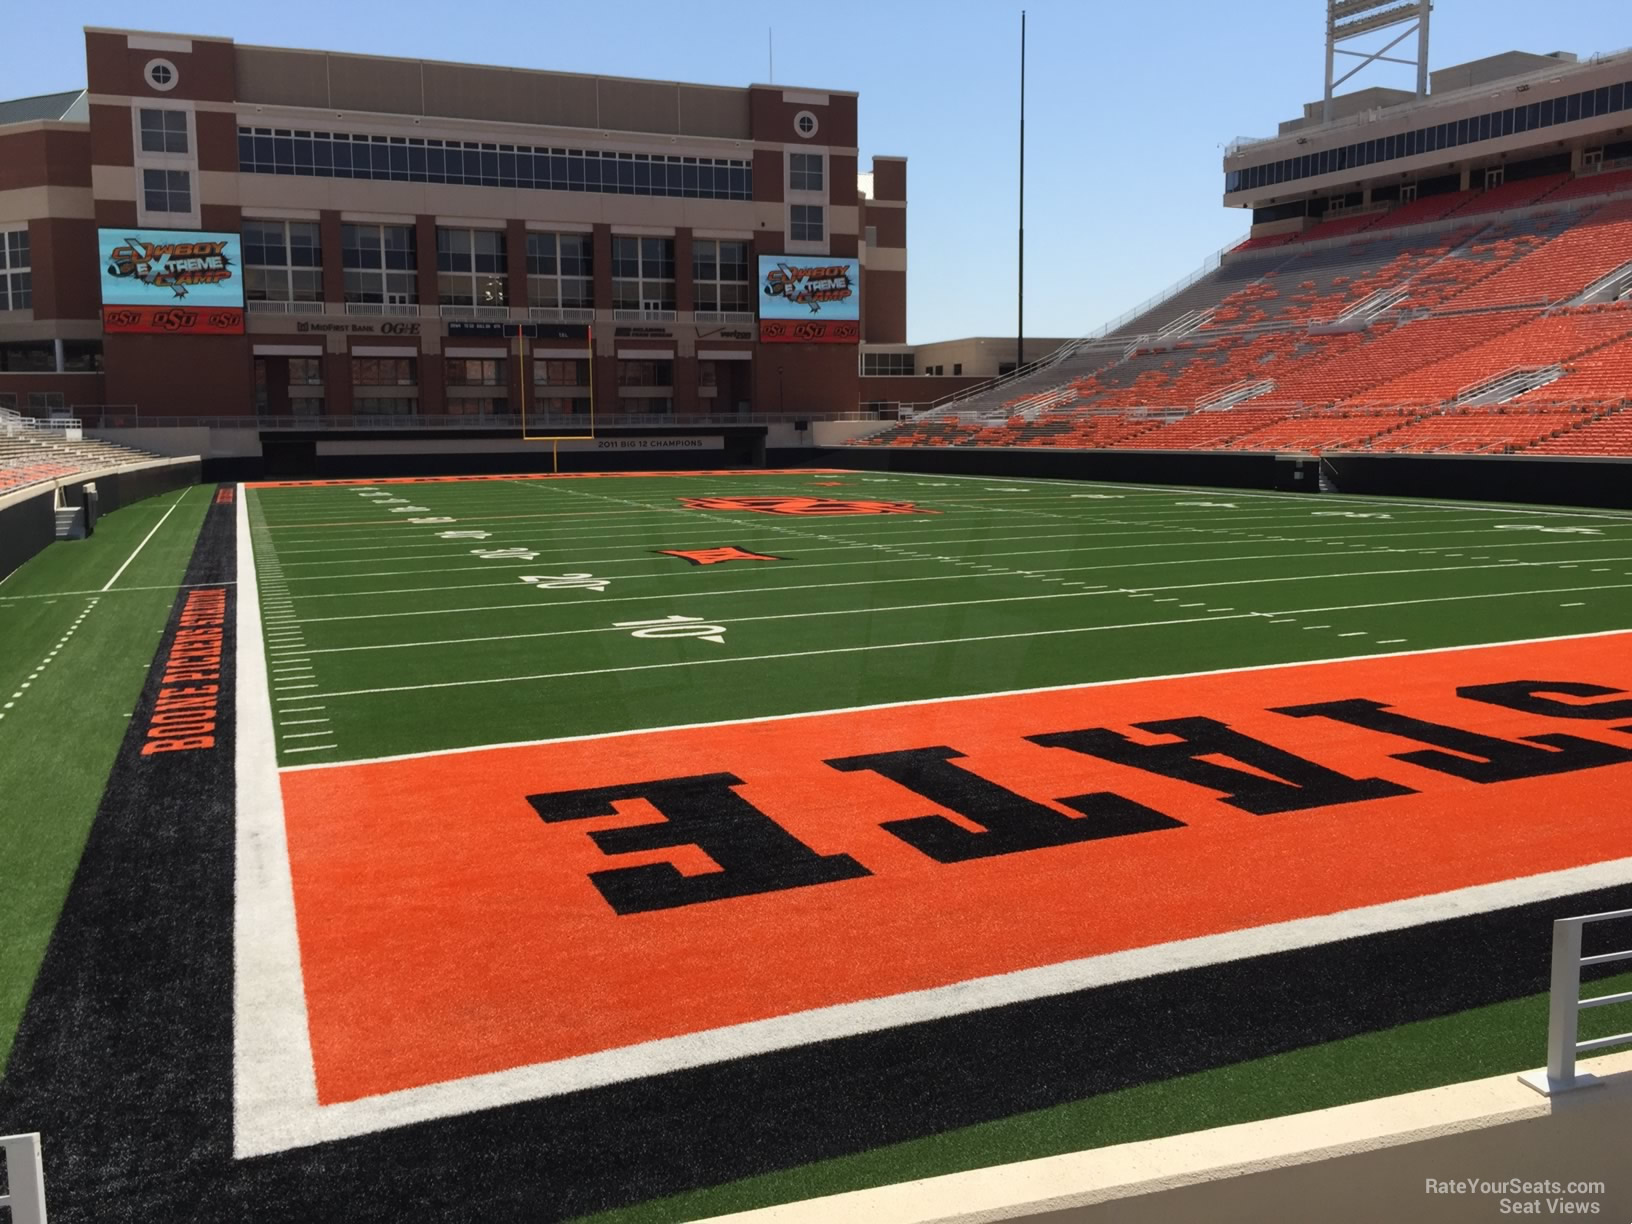 section 114, row 4 seat view  - boone pickens stadium